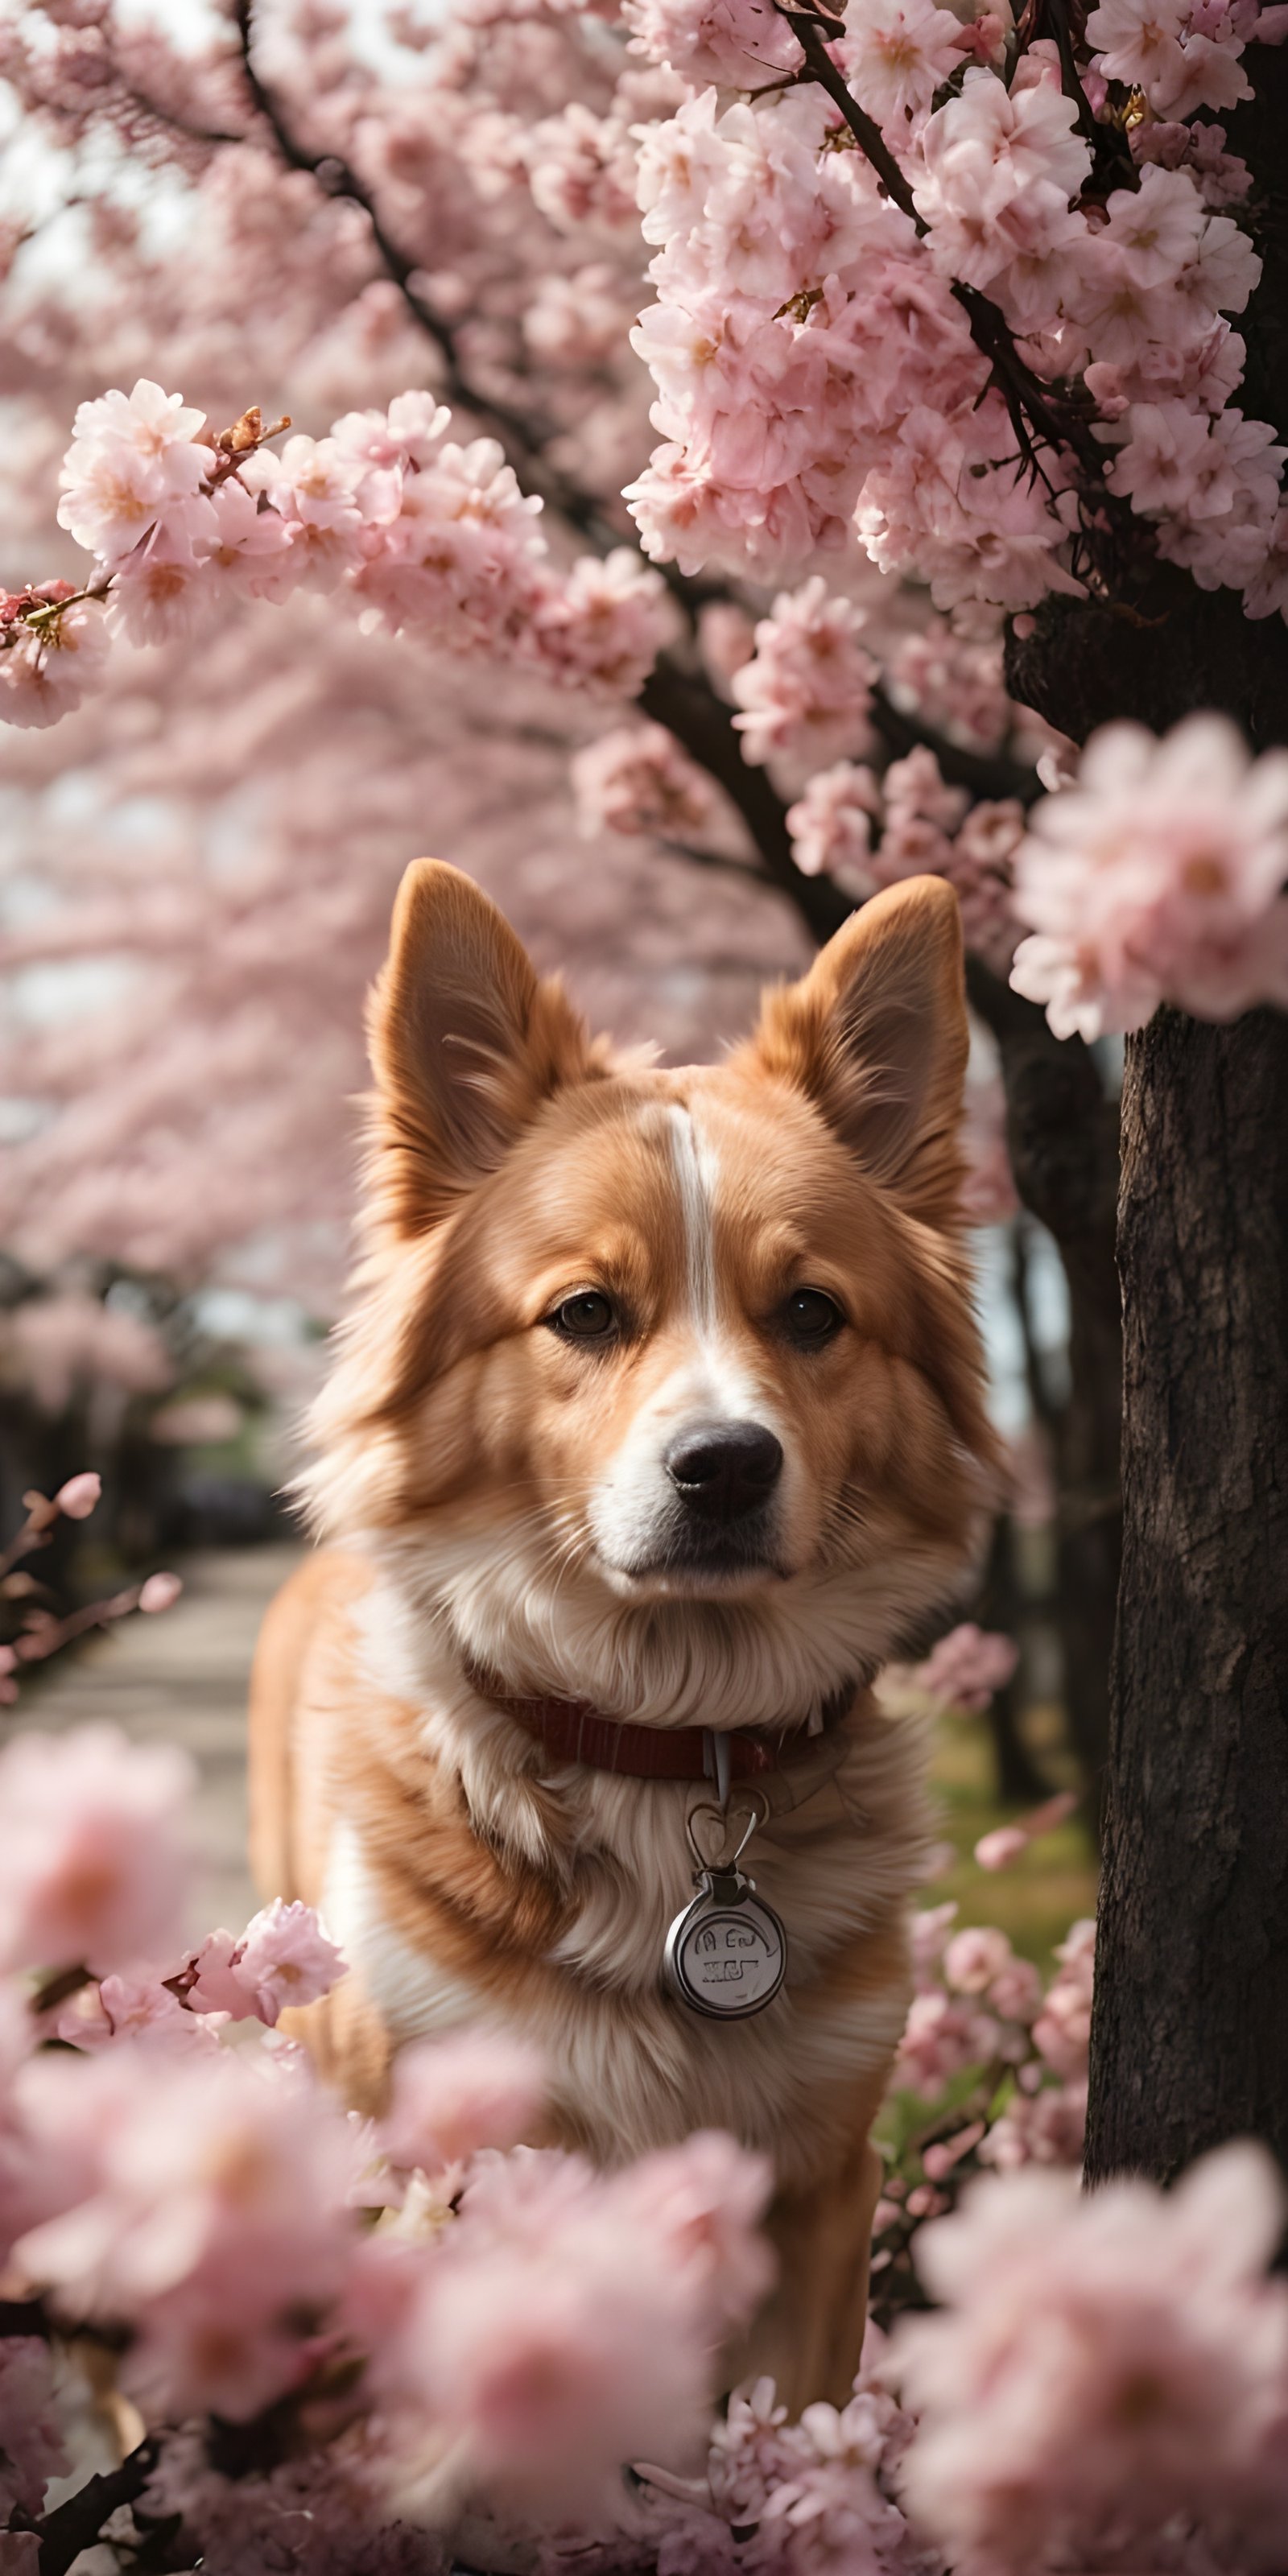 Dog in Blooming Cherry Blossom Phone Wallpaper